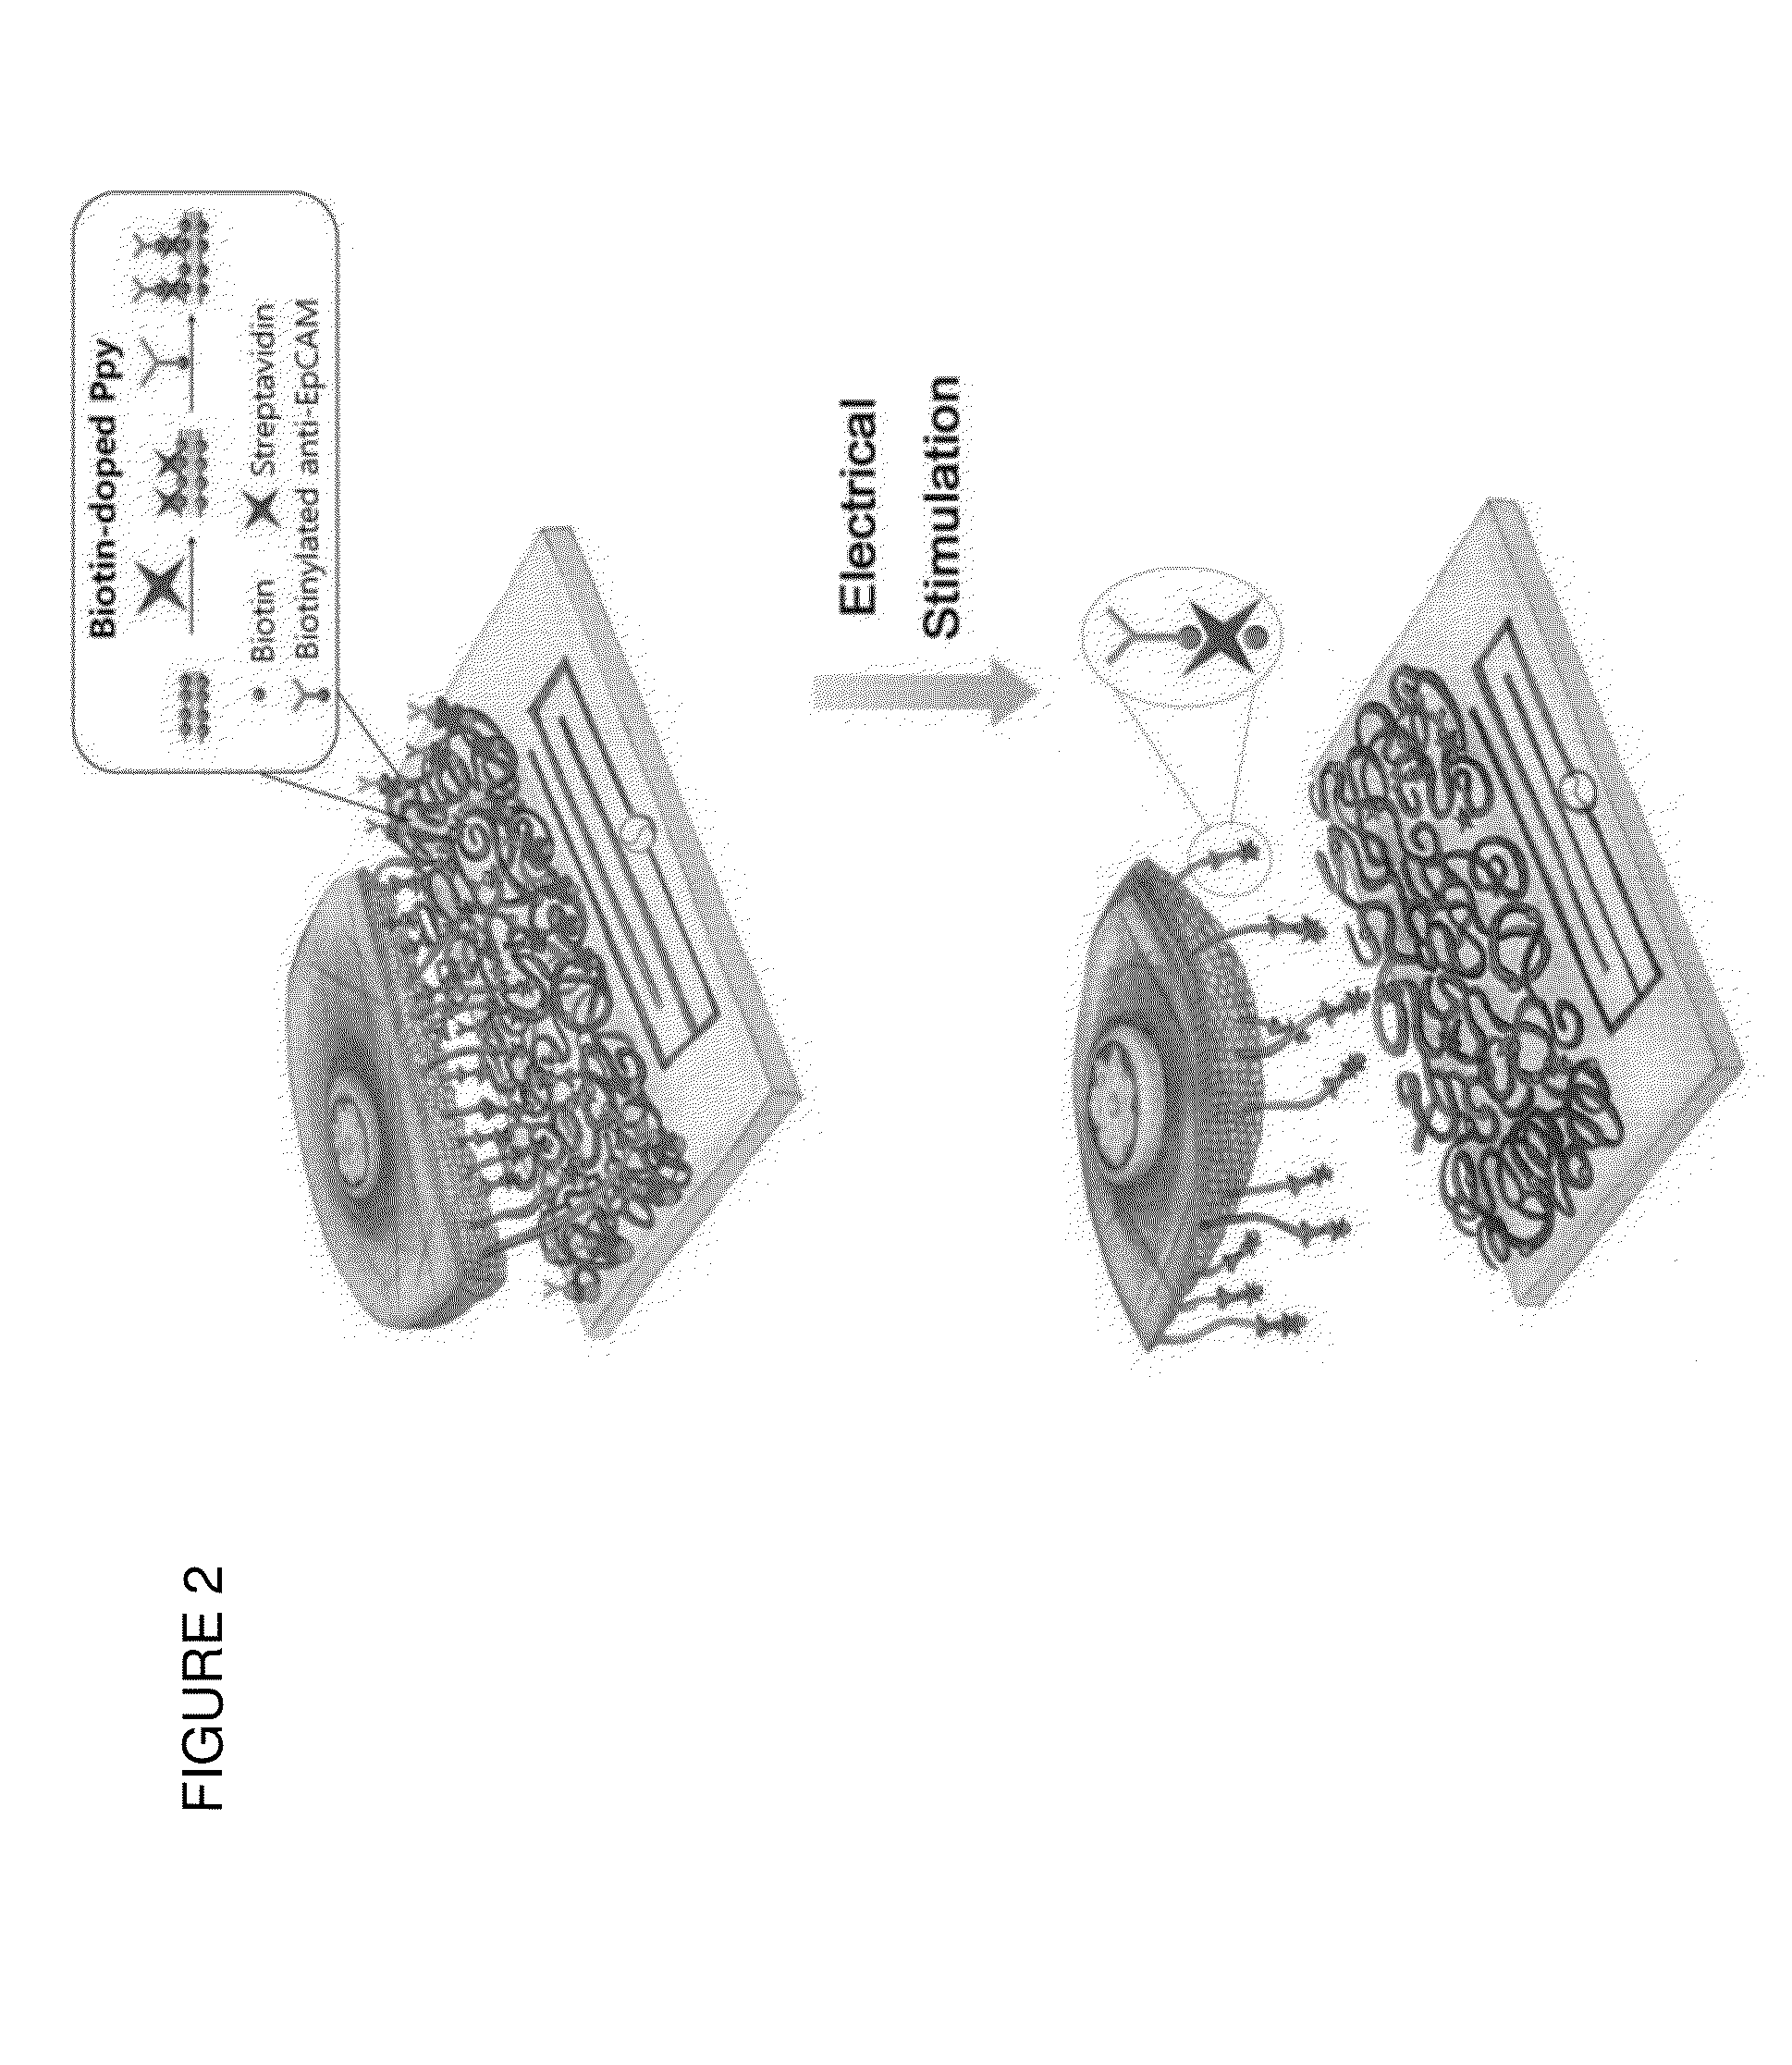 Composition comprising of a conducting polymer for detecting, capturing, releasing, and collecting cell